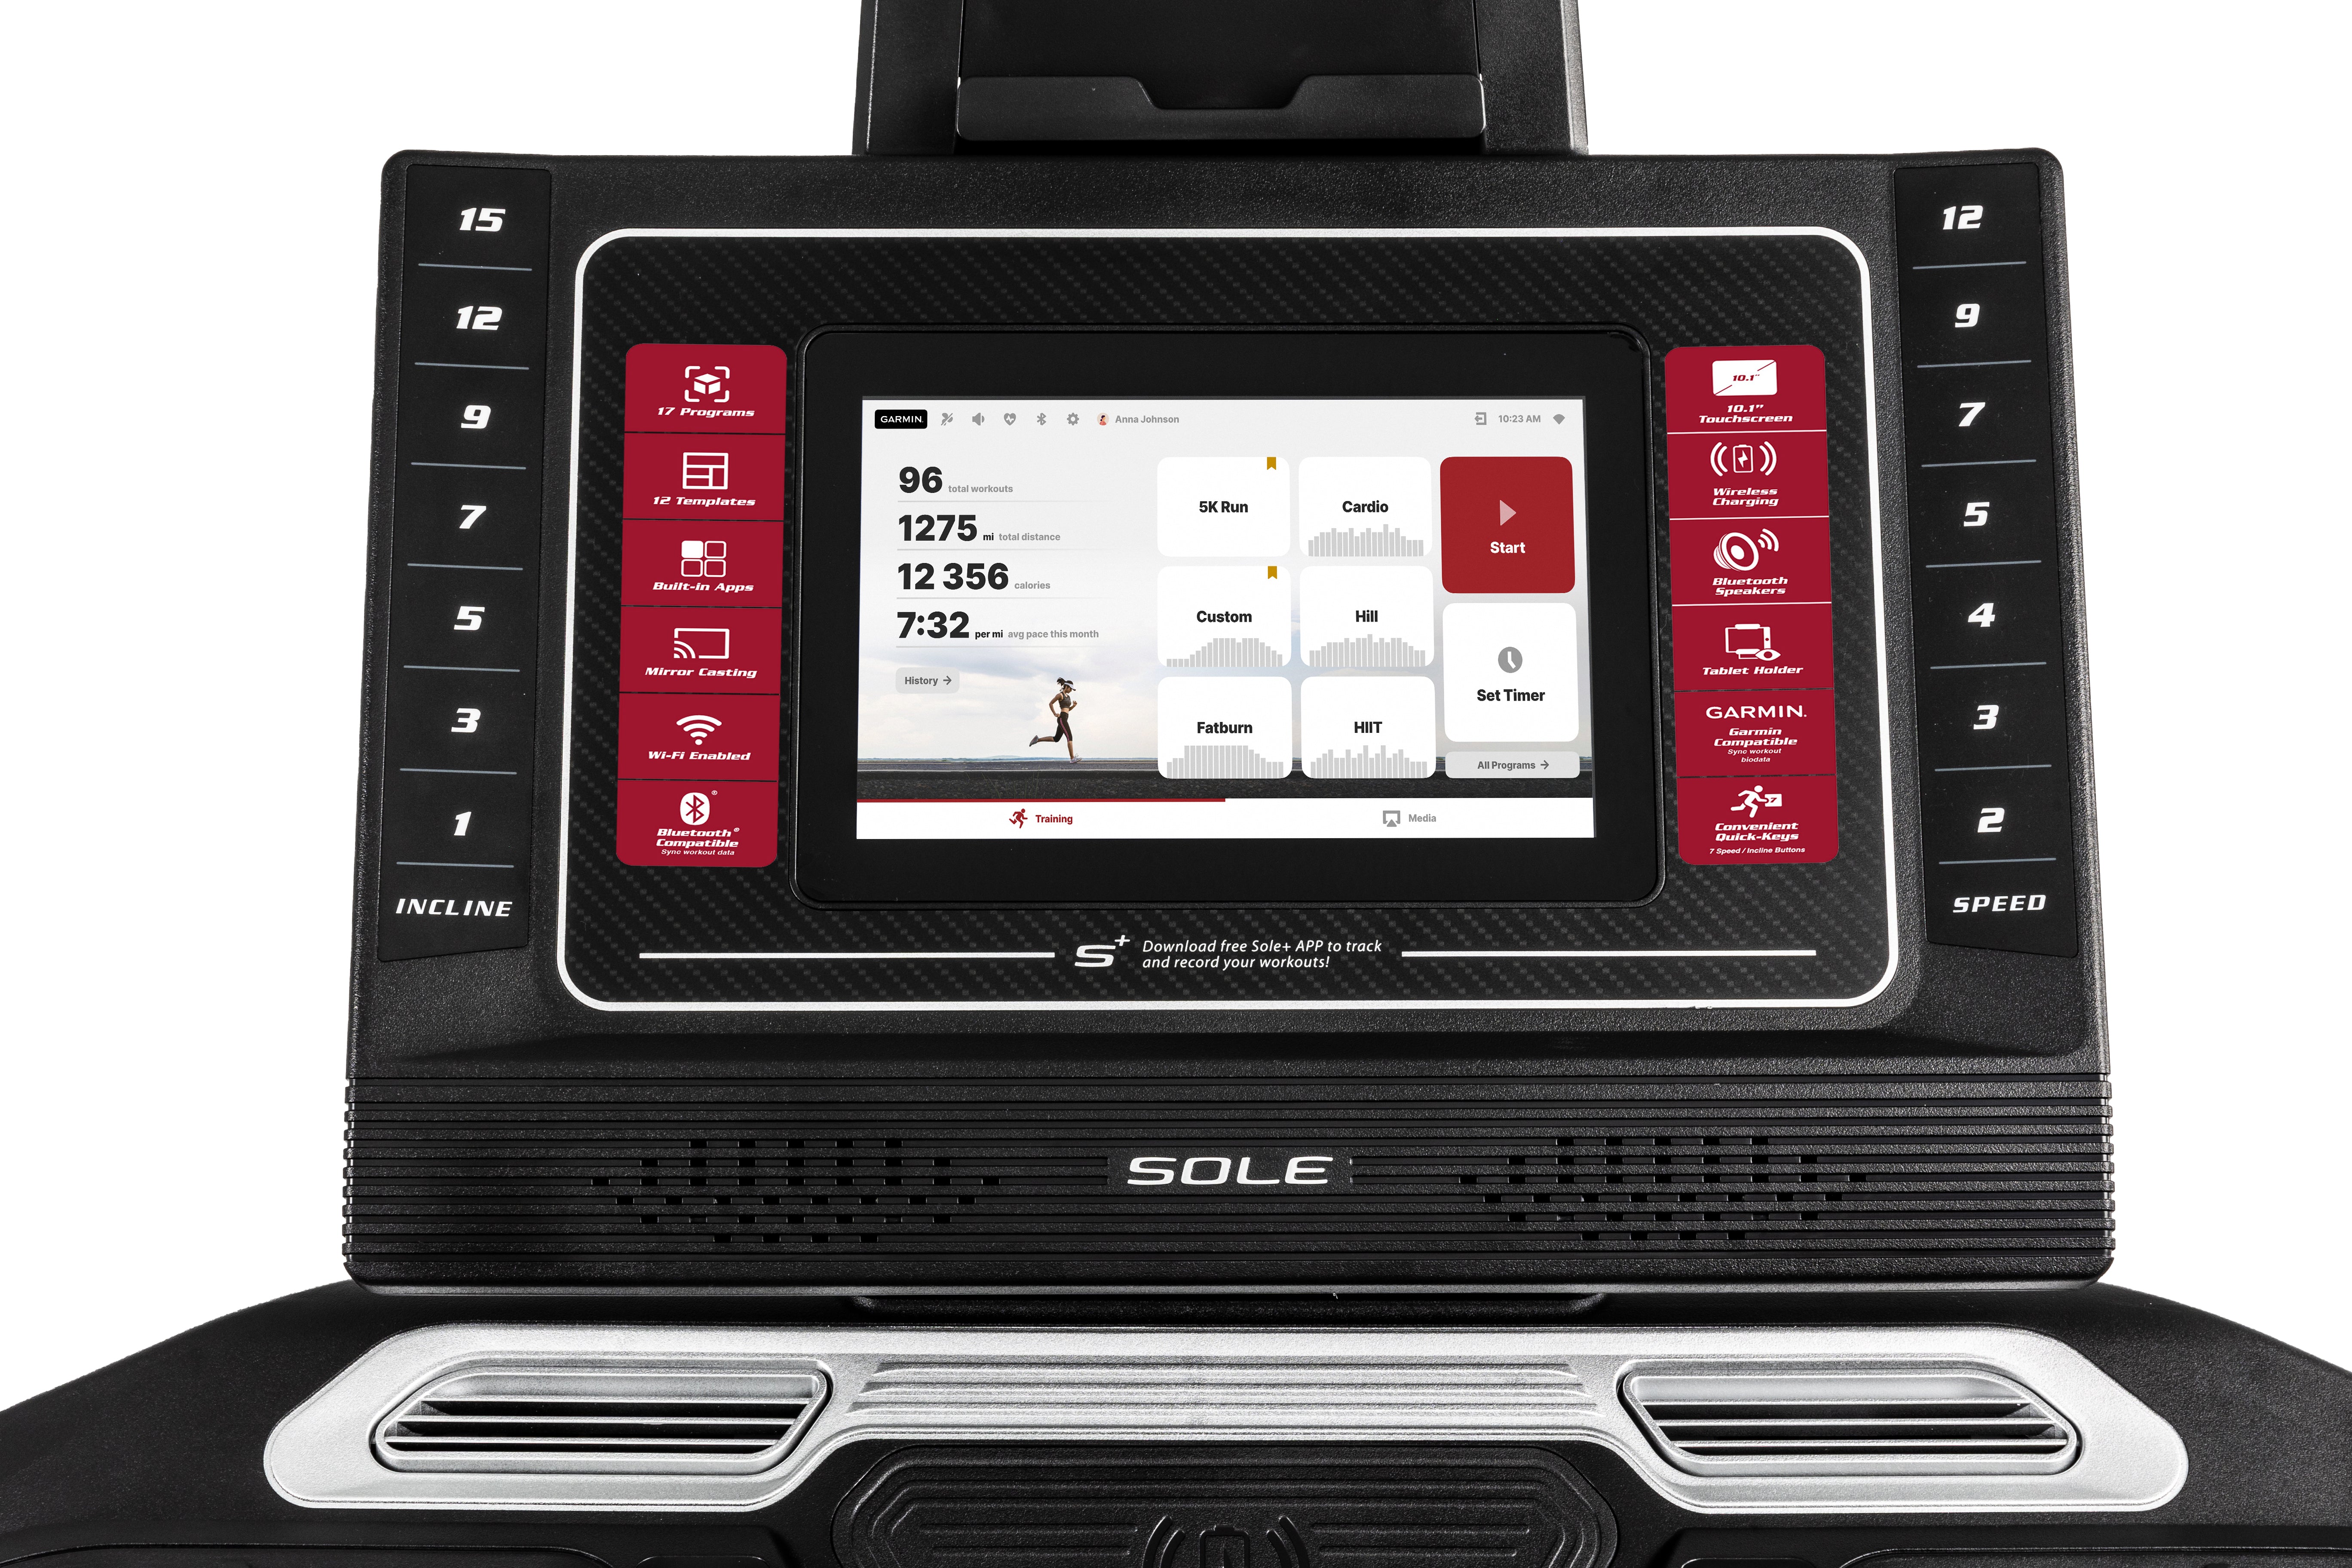 Close-up of the Sole F80 treadmill's console, displaying a digital touch screen with various workout metrics and options. The left side indicates incline levels, and the right shows speed settings. Below the screen is the Sole branding and integrated speakers.